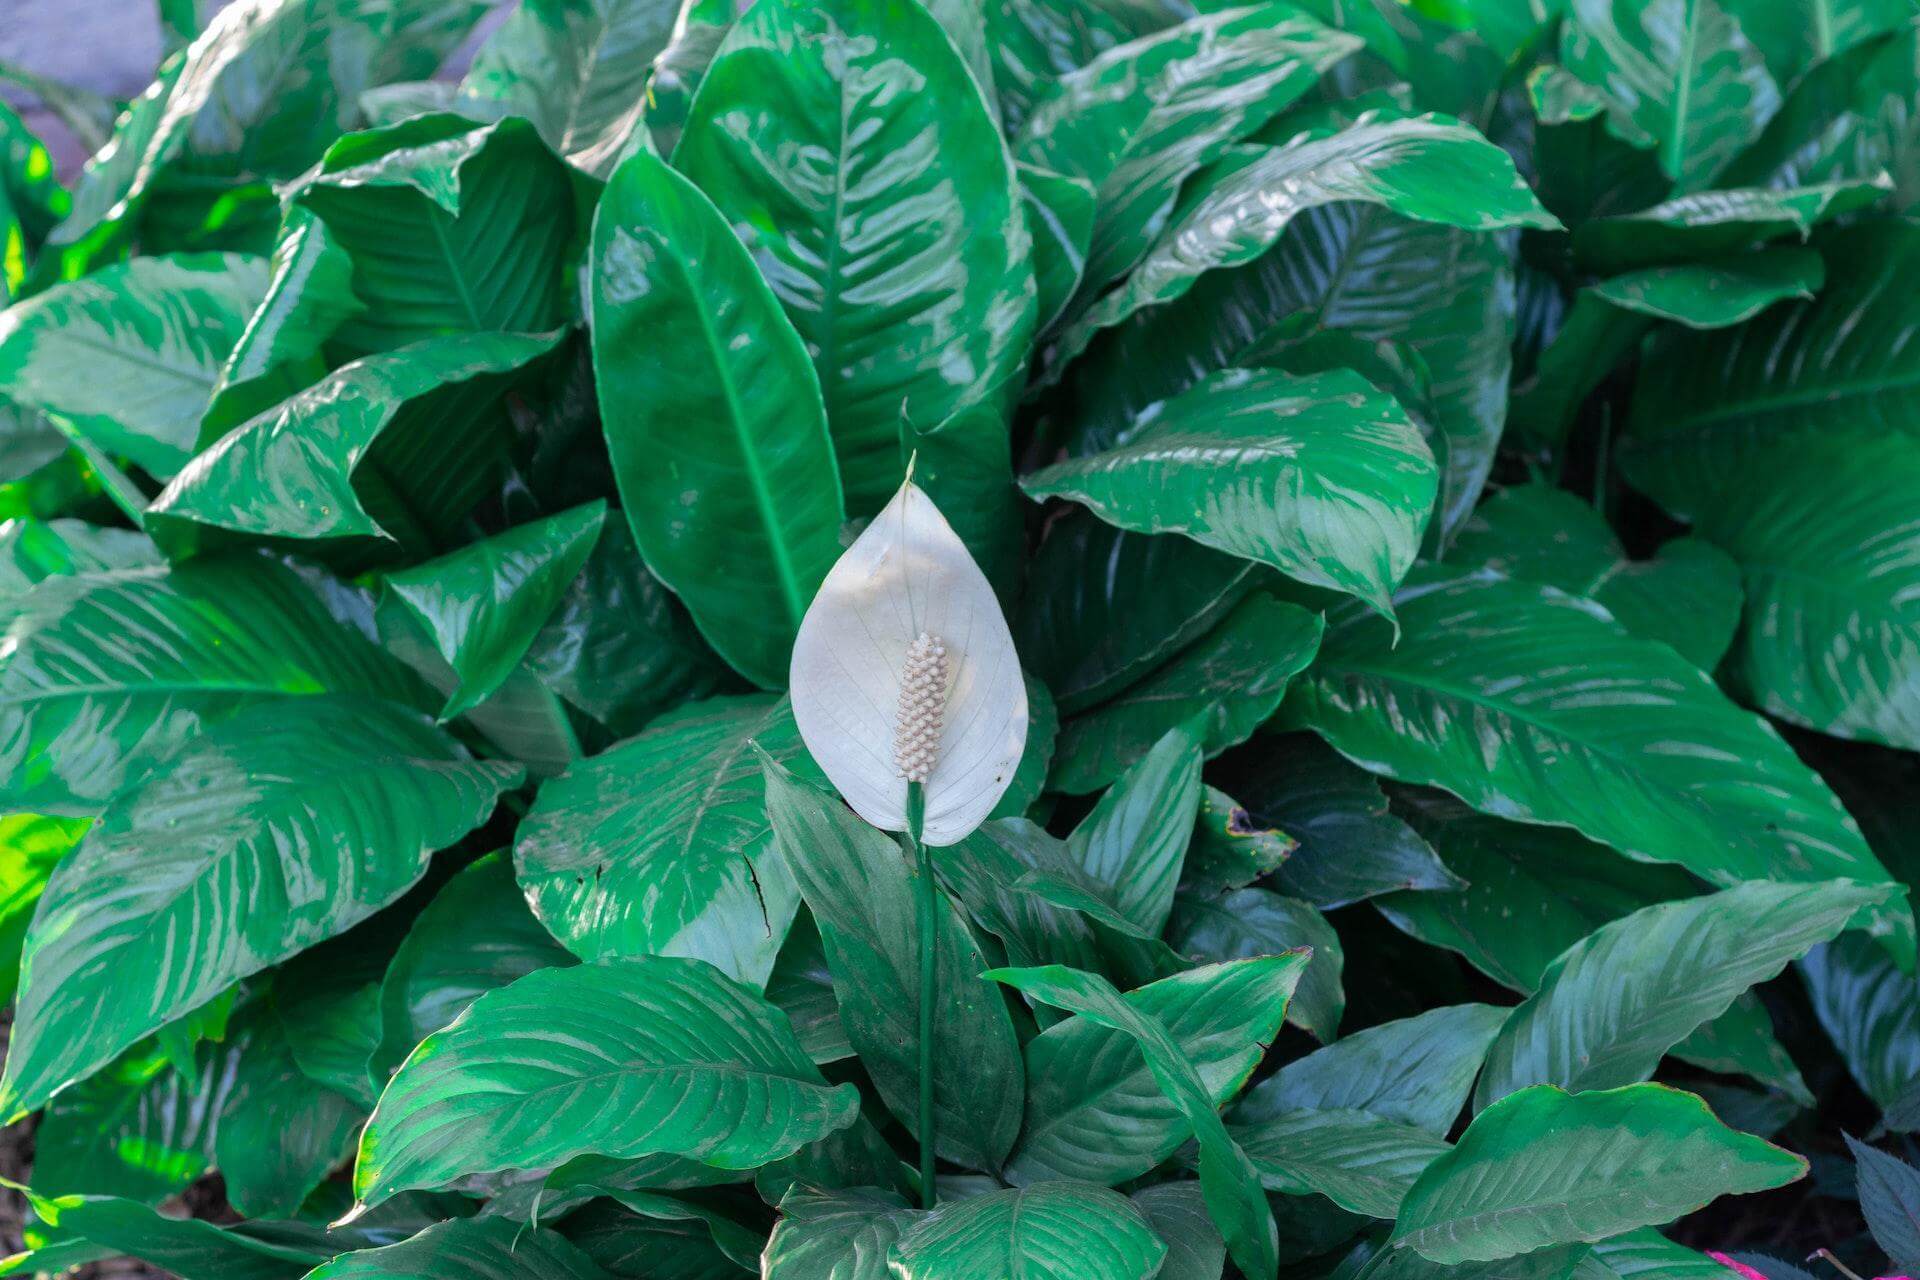 How to care for a peace lily